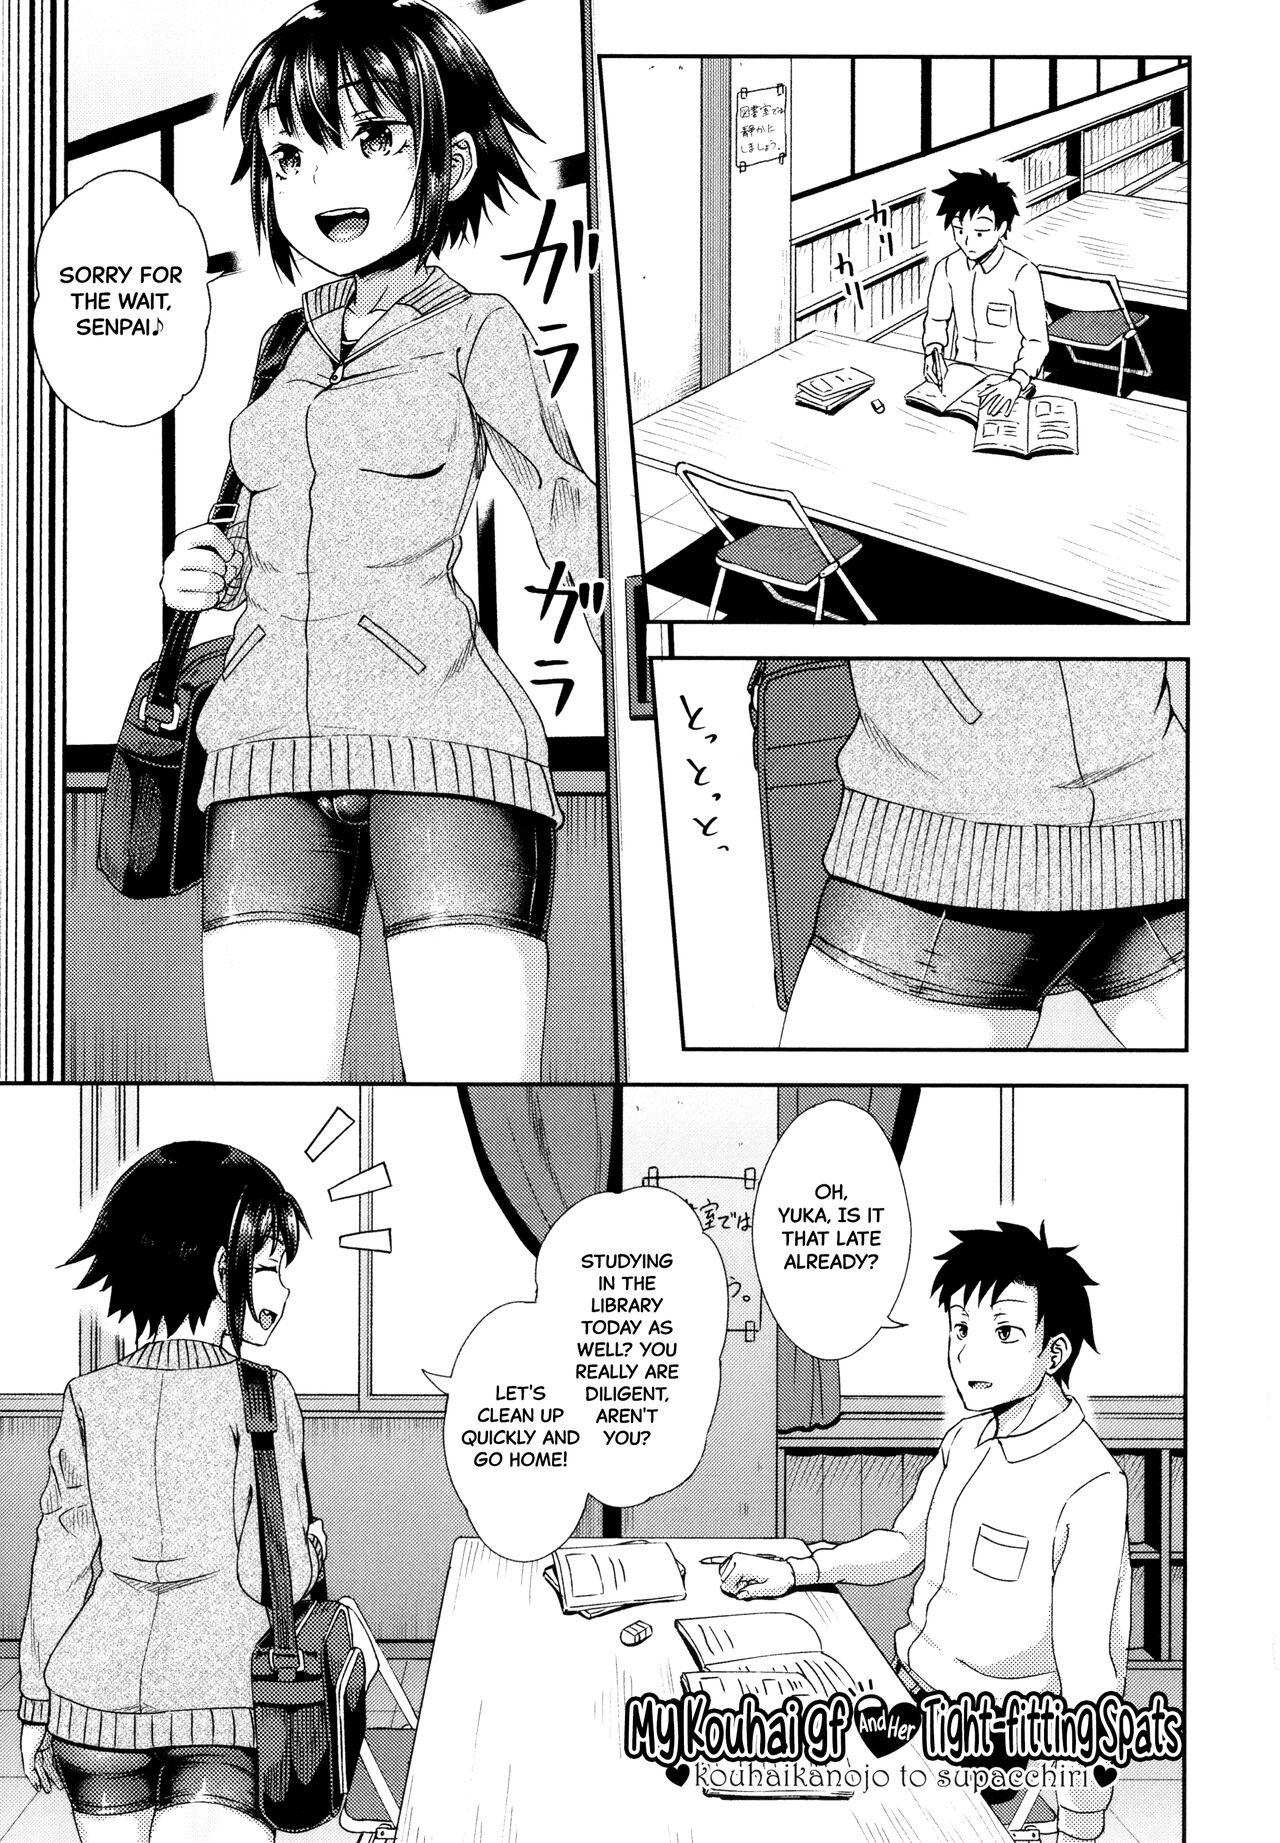 Vietnamese Kouhai Kanojo to Supatchiri | My Kouhai gf and her Tight-Fitting Spats Shemales - Picture 1